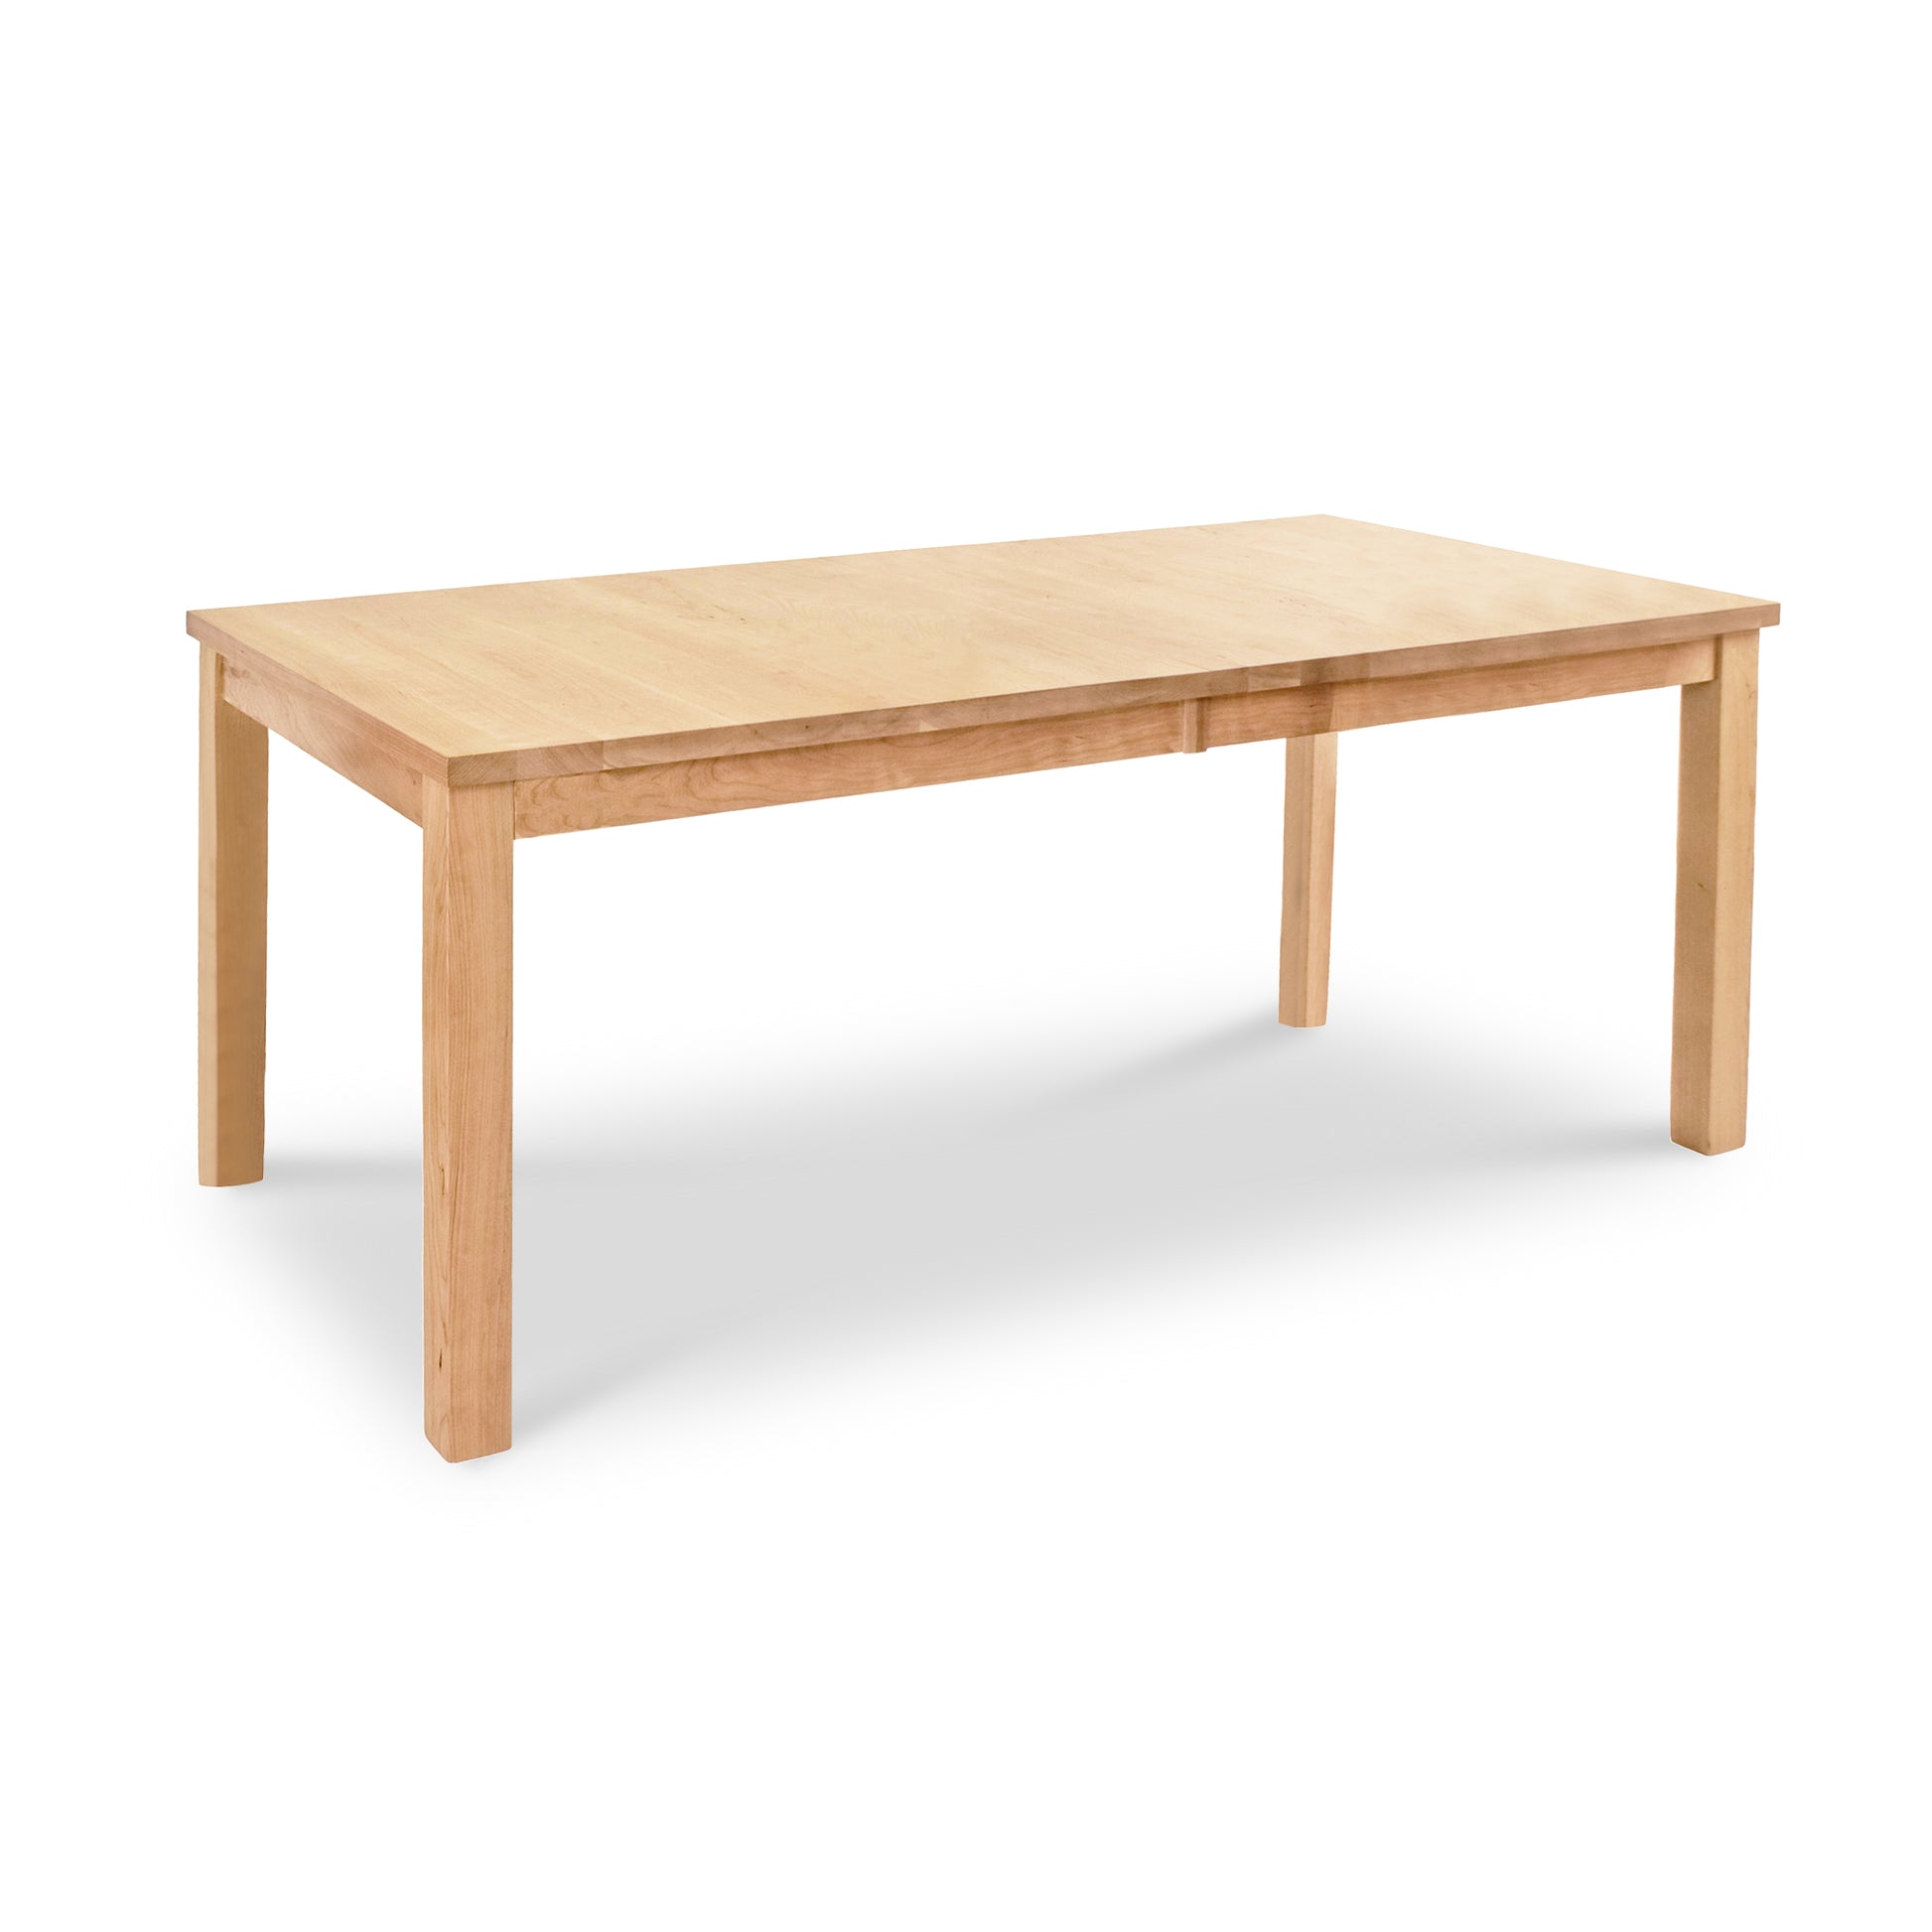 An eco-friendly Lyndon Furniture Modern Mission Parsons Extension Table on a white background, made from sustainably harvested woods.